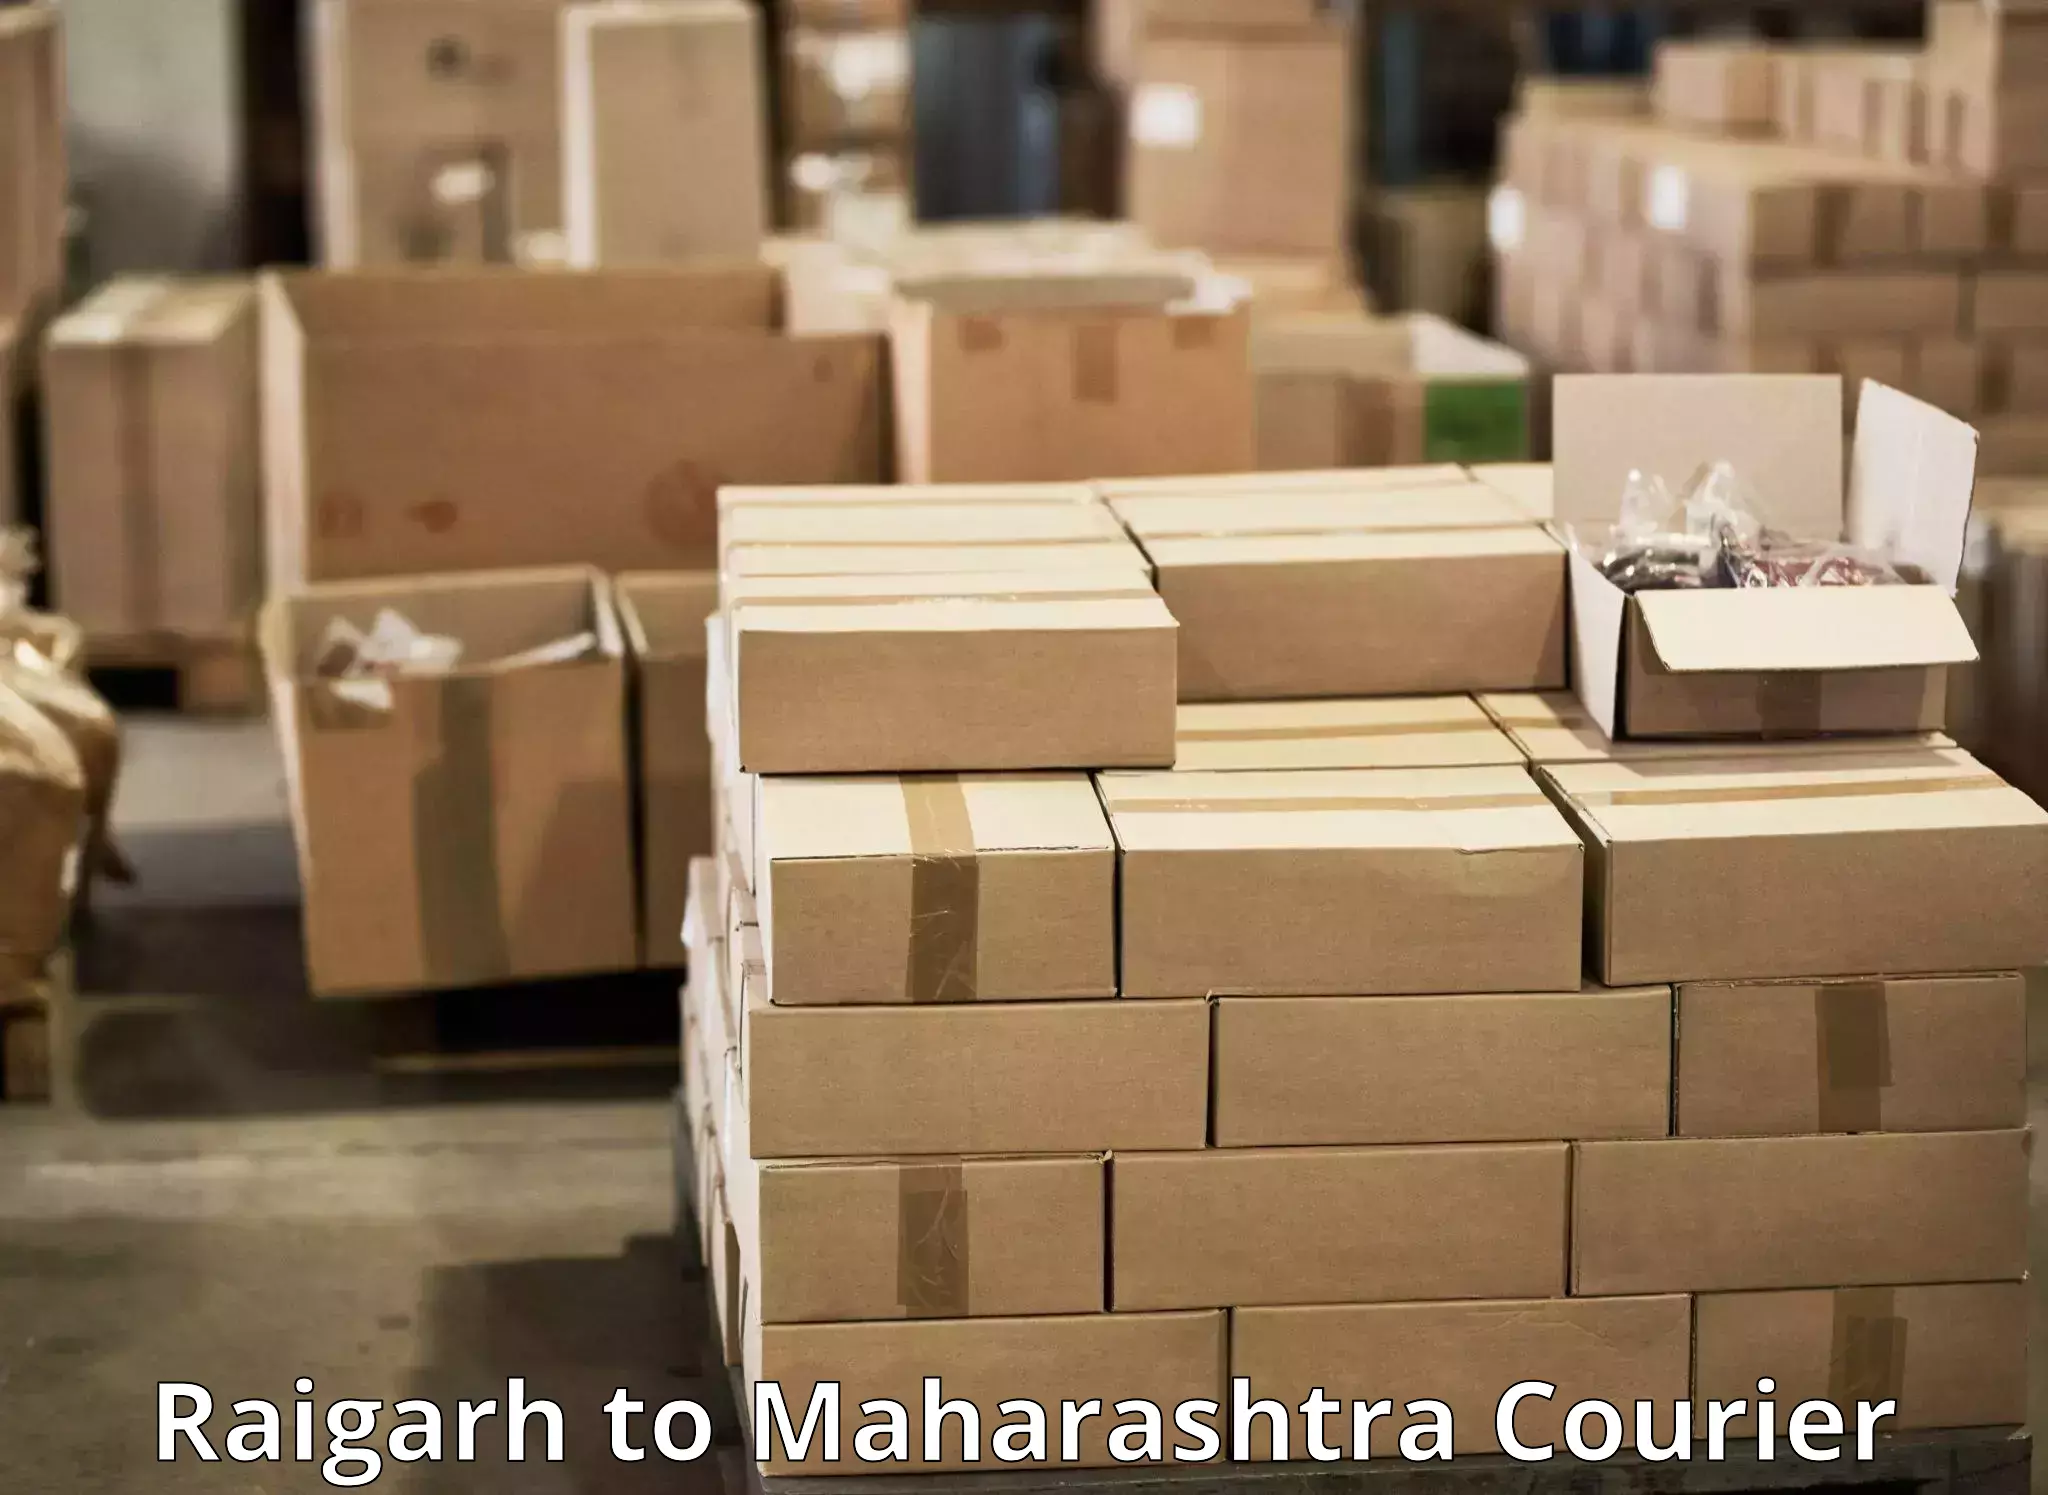 Long distance courier Raigarh to Tata Institute of Social Sciences Mumbai